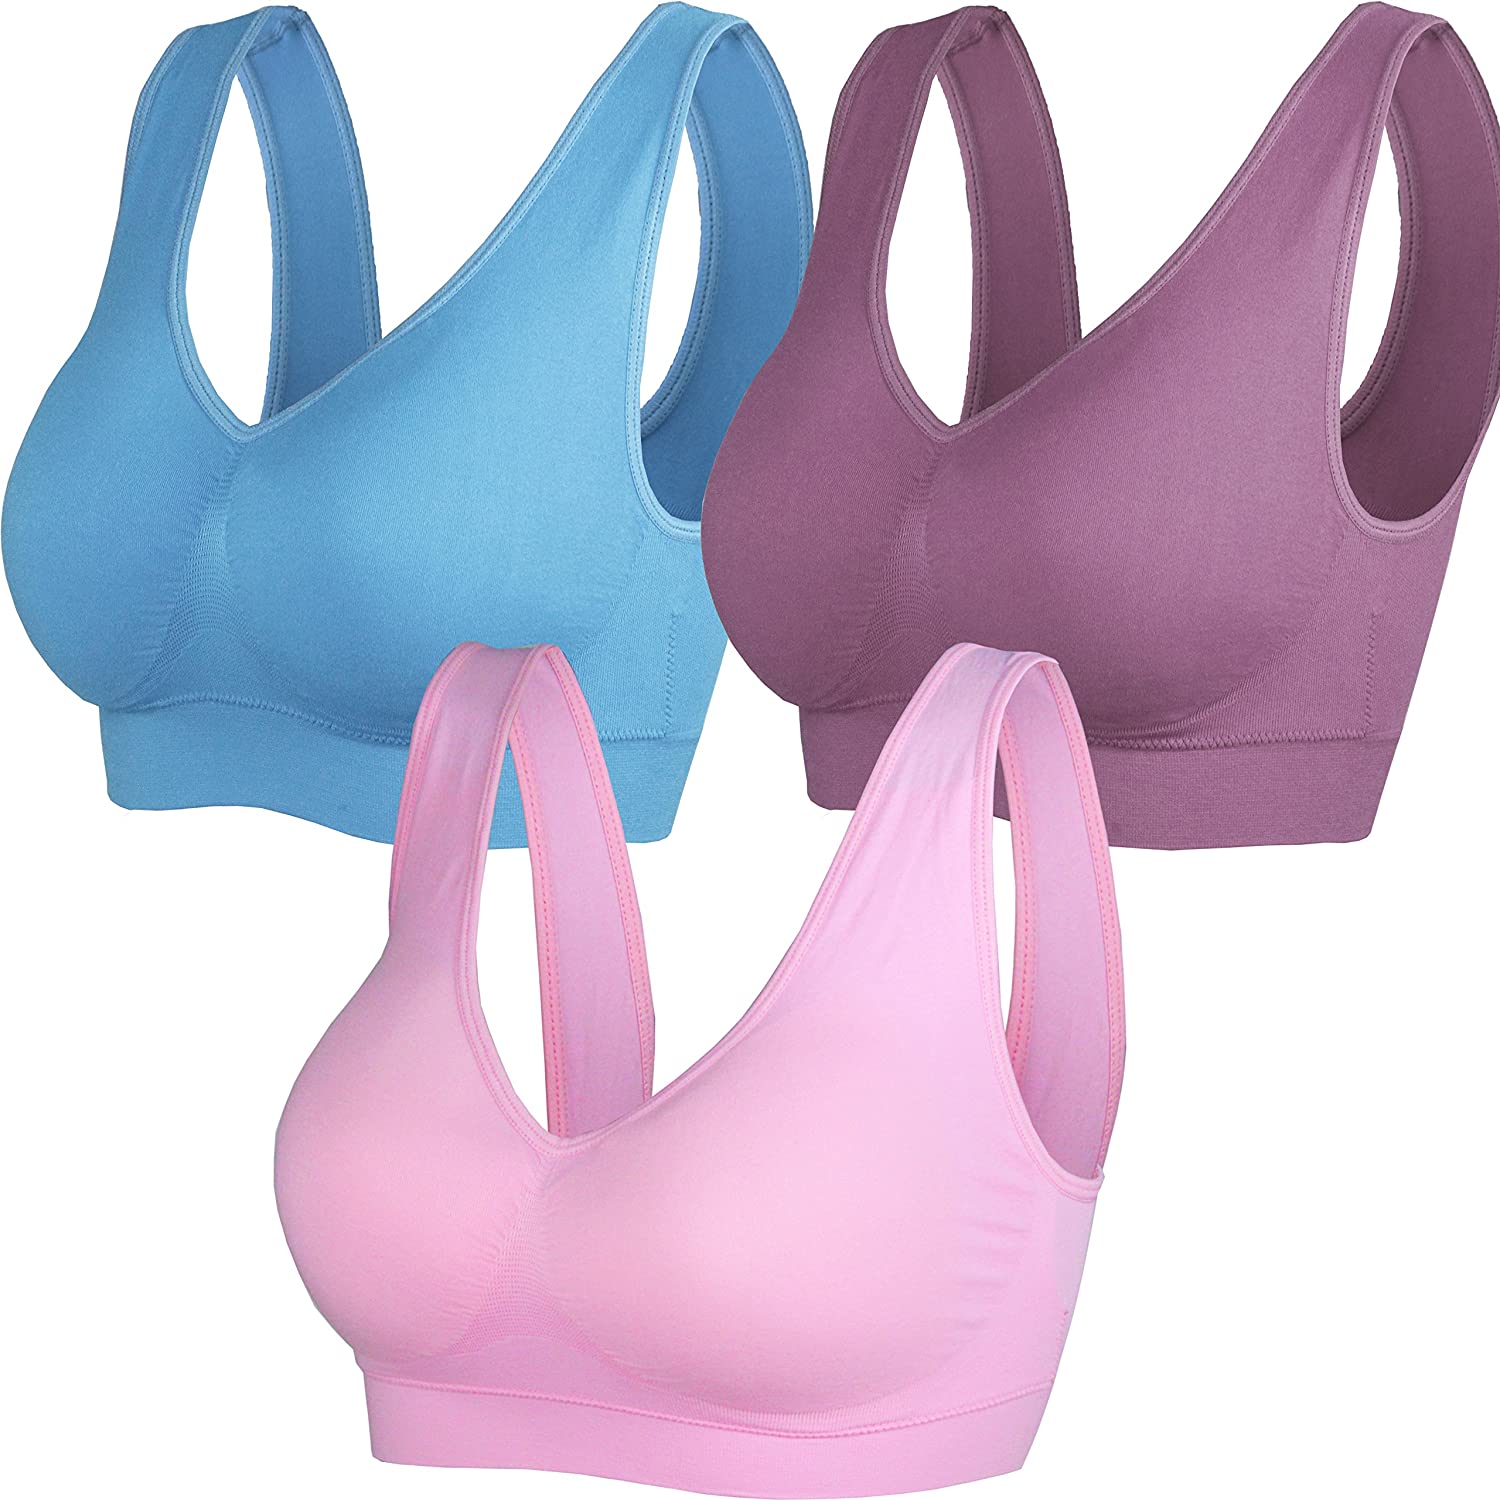 Cabales Women S 3 Pack Seamless Wireless Sports Bra With Removable Pads Ebay